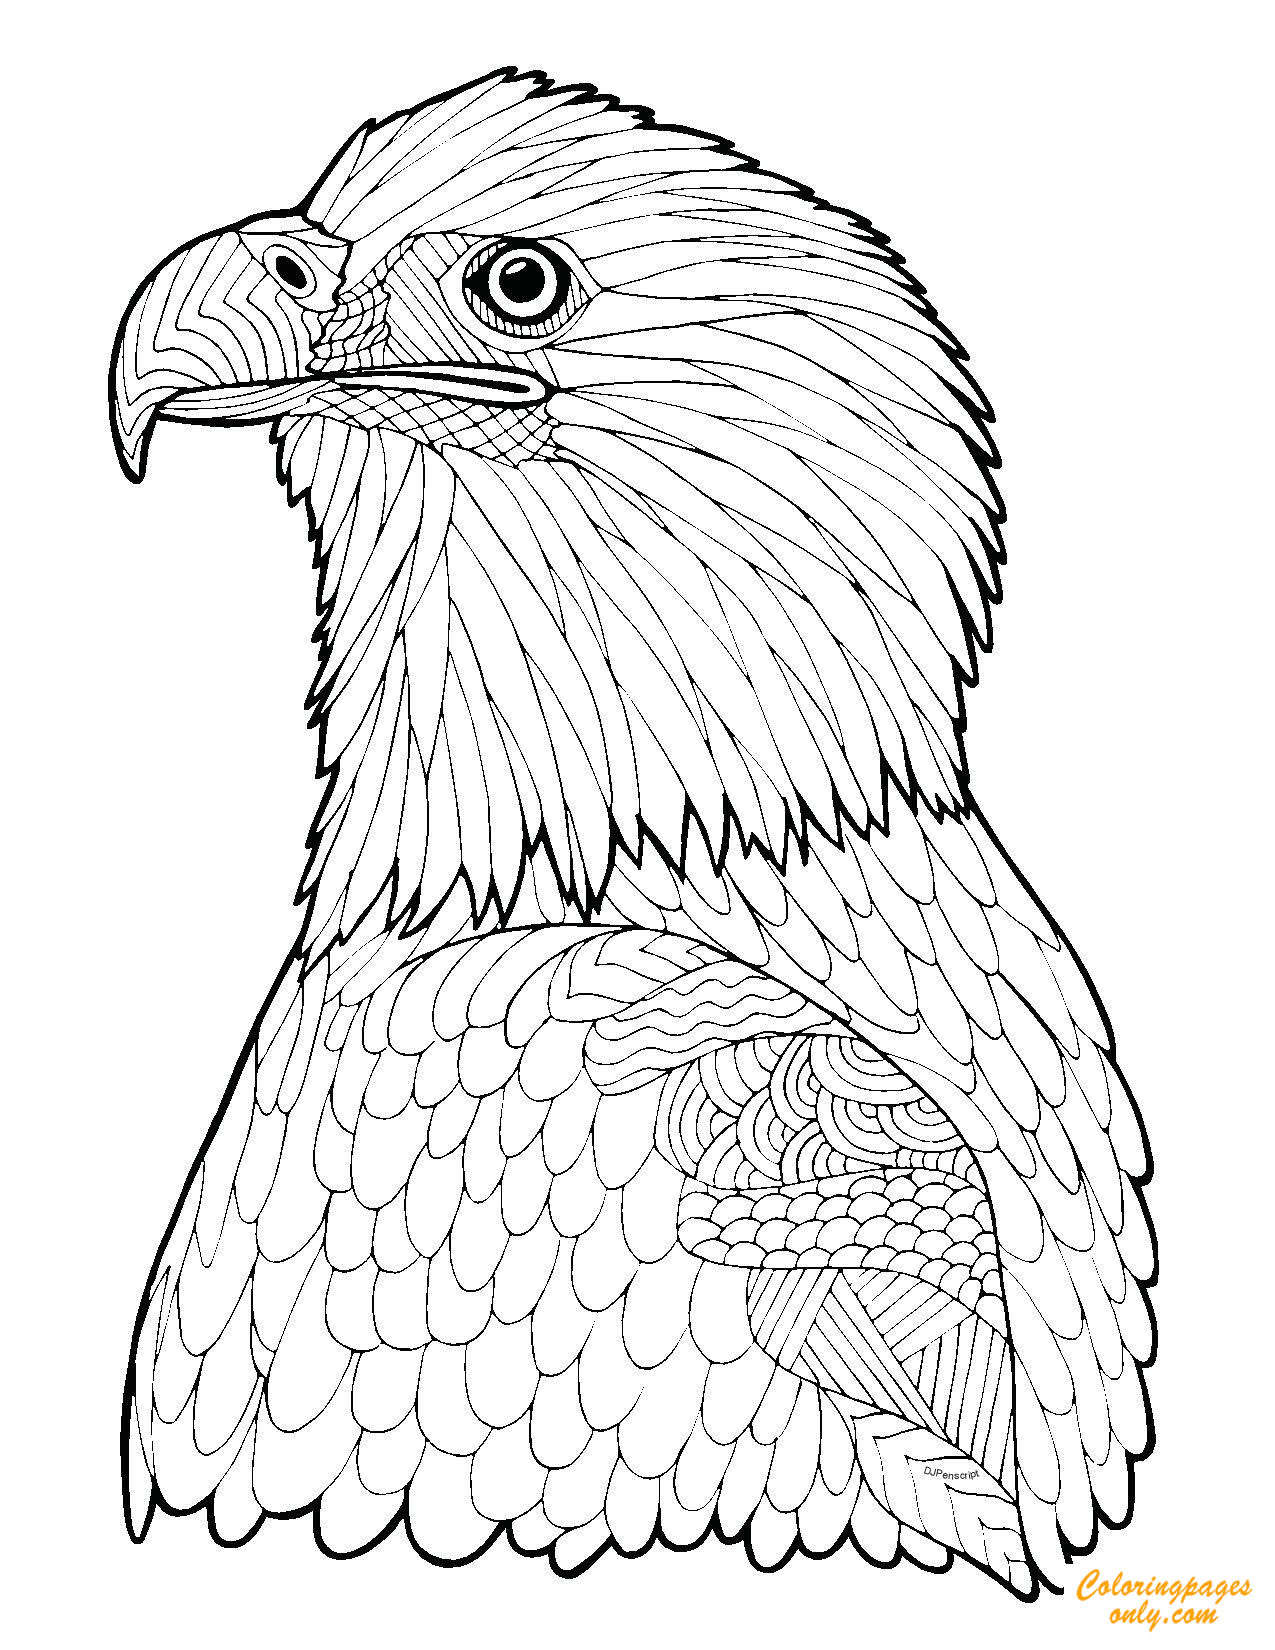 Zentangle Eagle Coloring Page - Free Coloring Pages Online